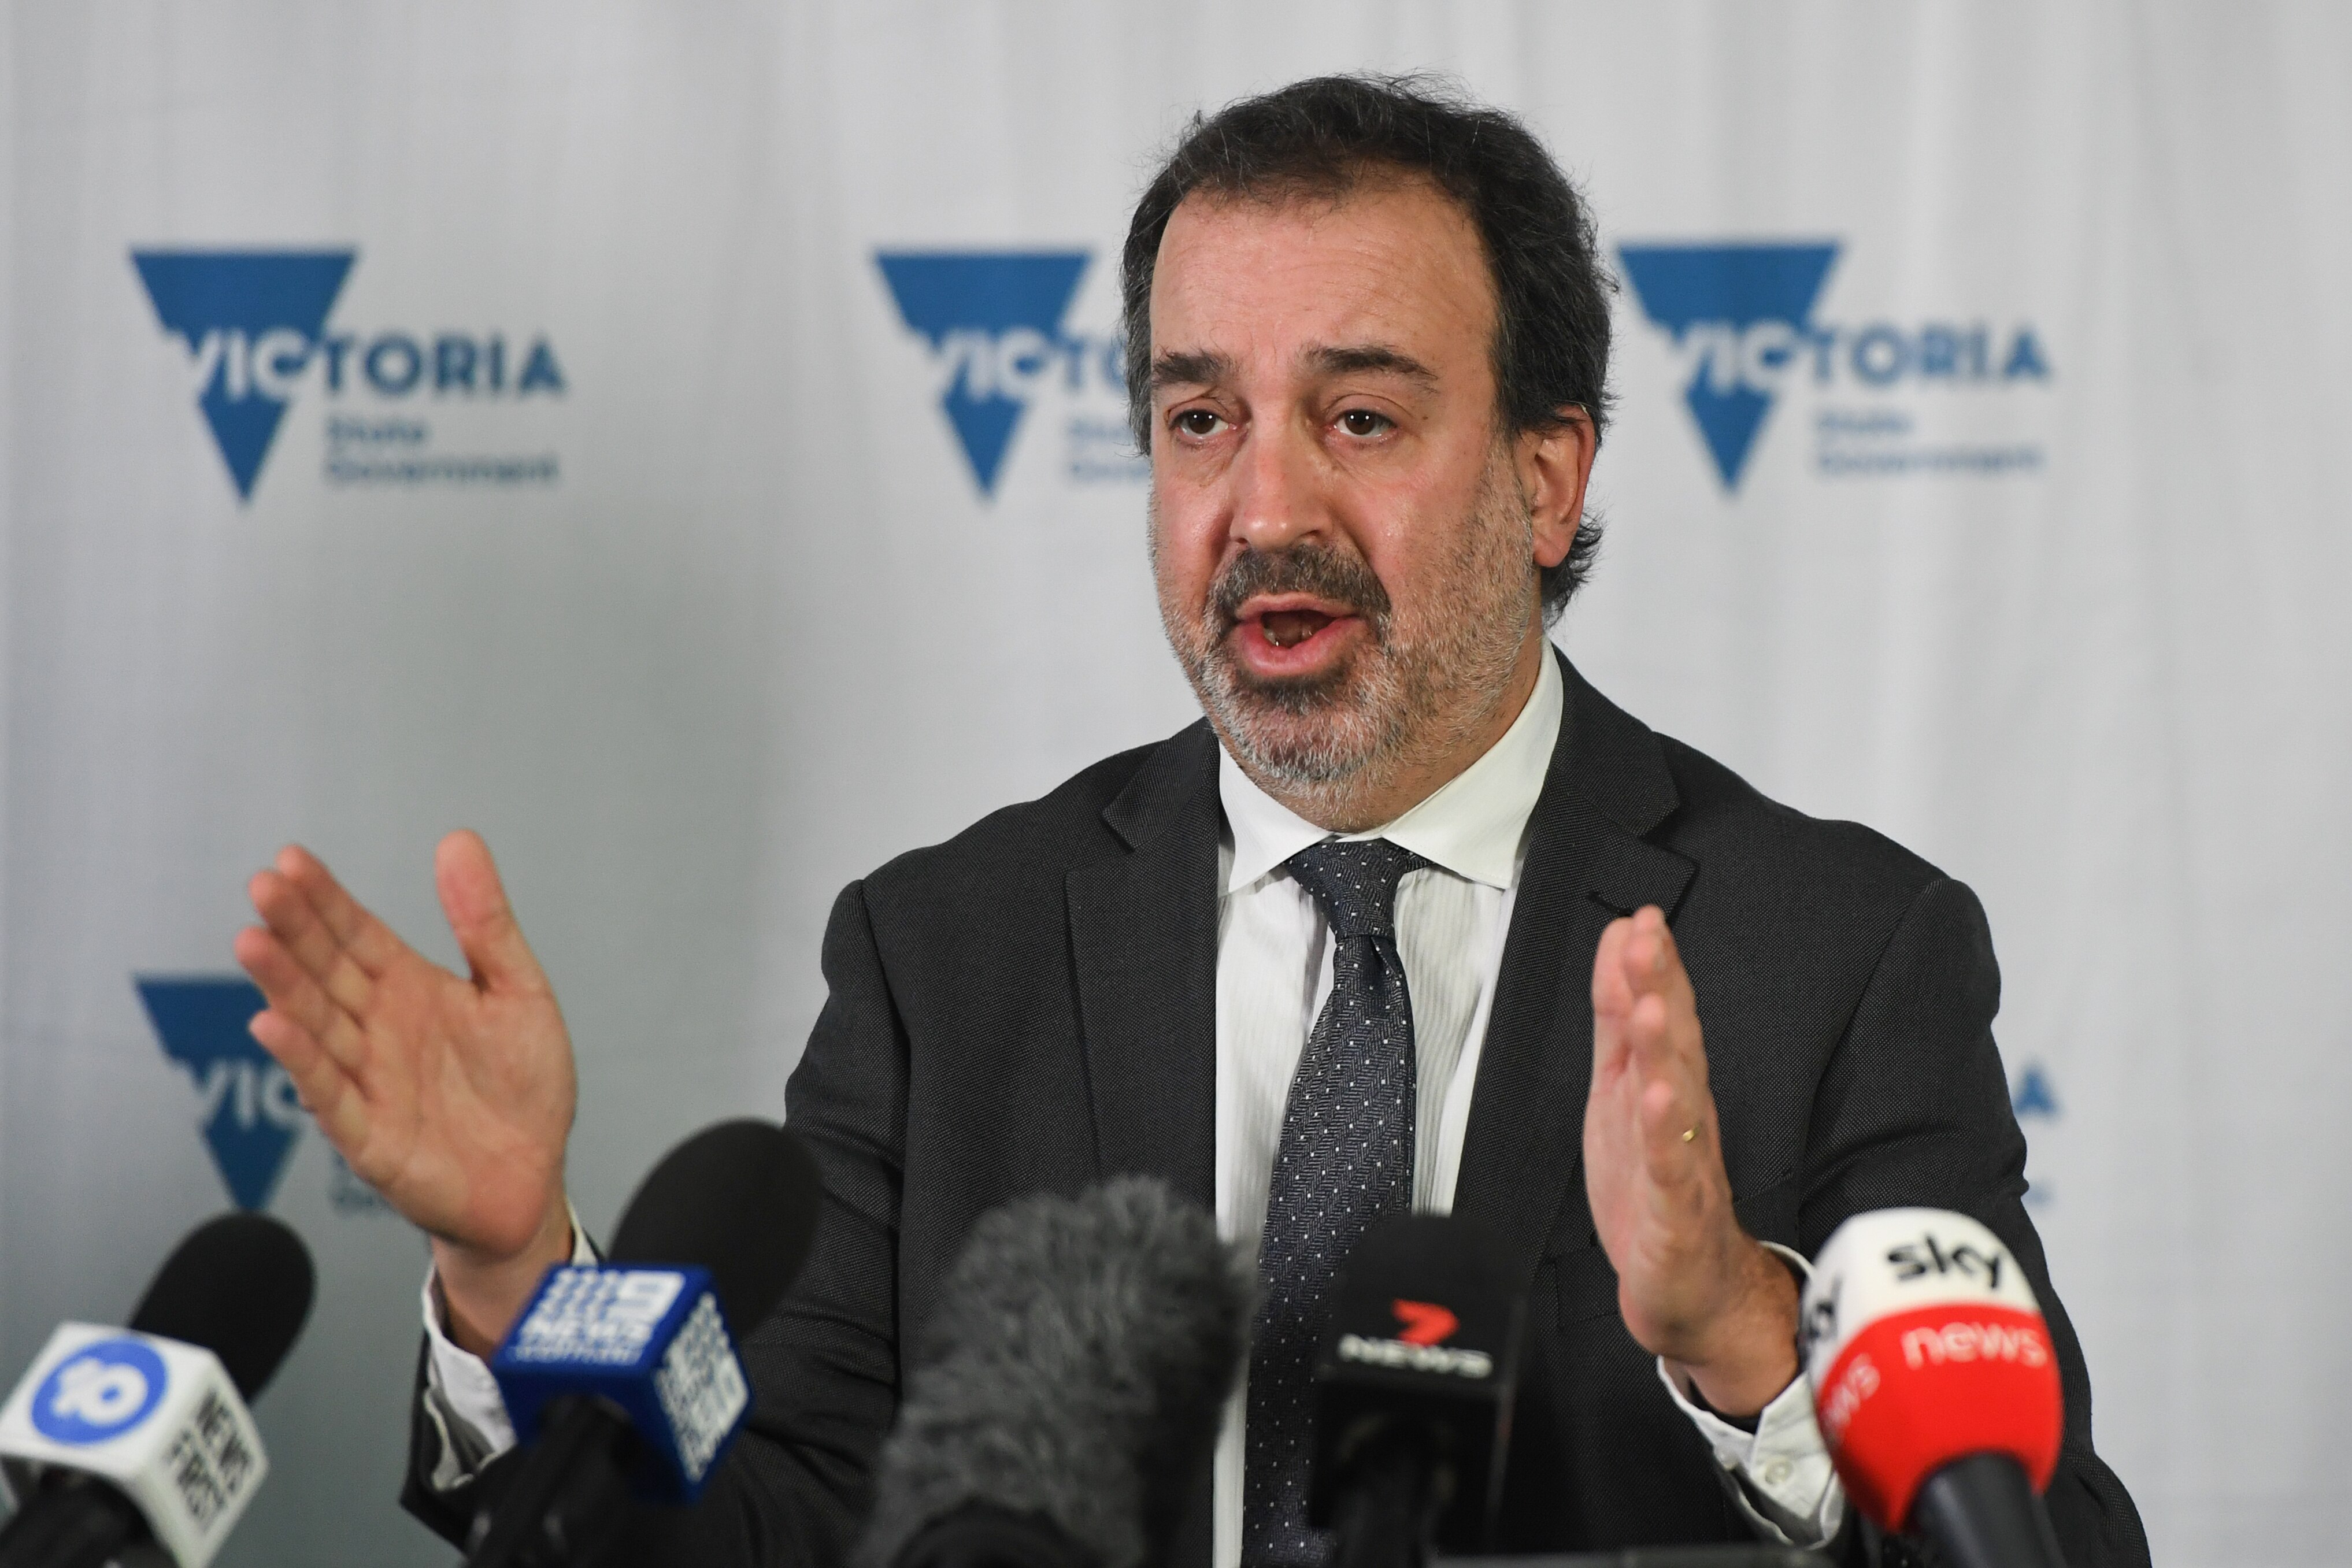 Victorian Minister for Industry Support and Recovery Martin Pakula speaks to the media during a press conference in Melbourne, Thursday, August 12, 2021. (AAP Image/Erik Anderon) NO ARCHIVING